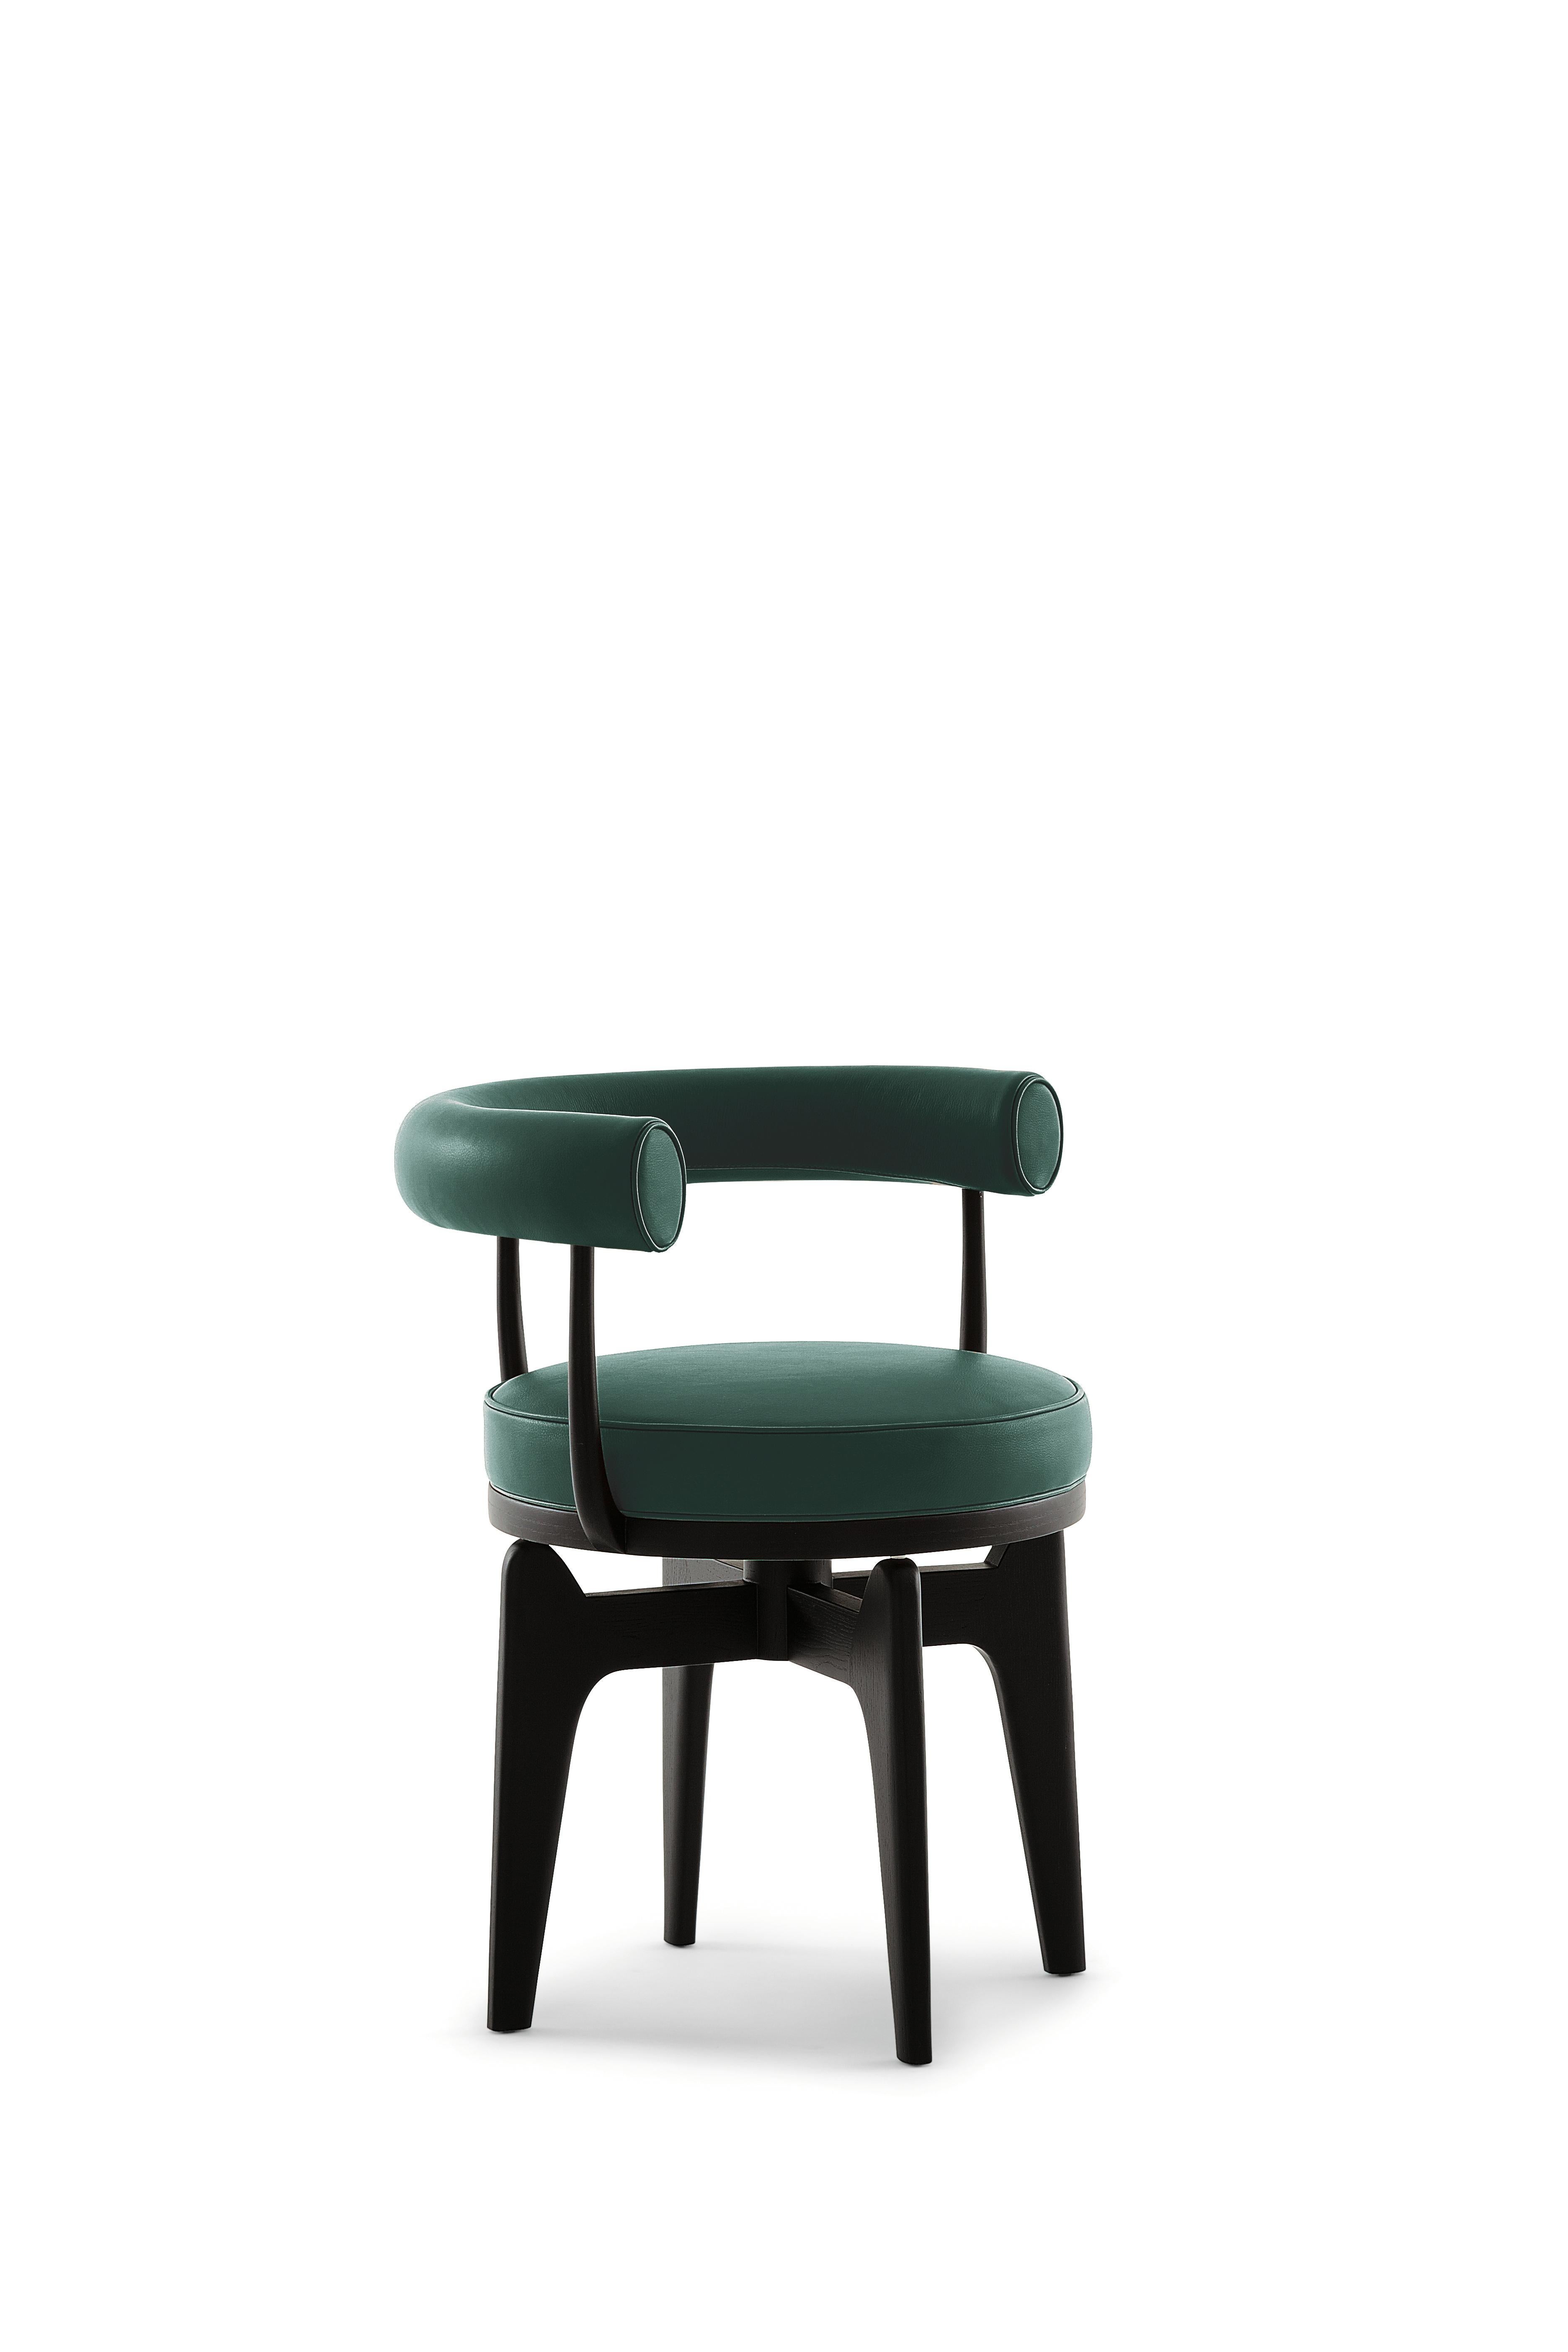 Charlotte Perriand Indochine Armchair  In New Condition For Sale In Barcelona, Barcelona